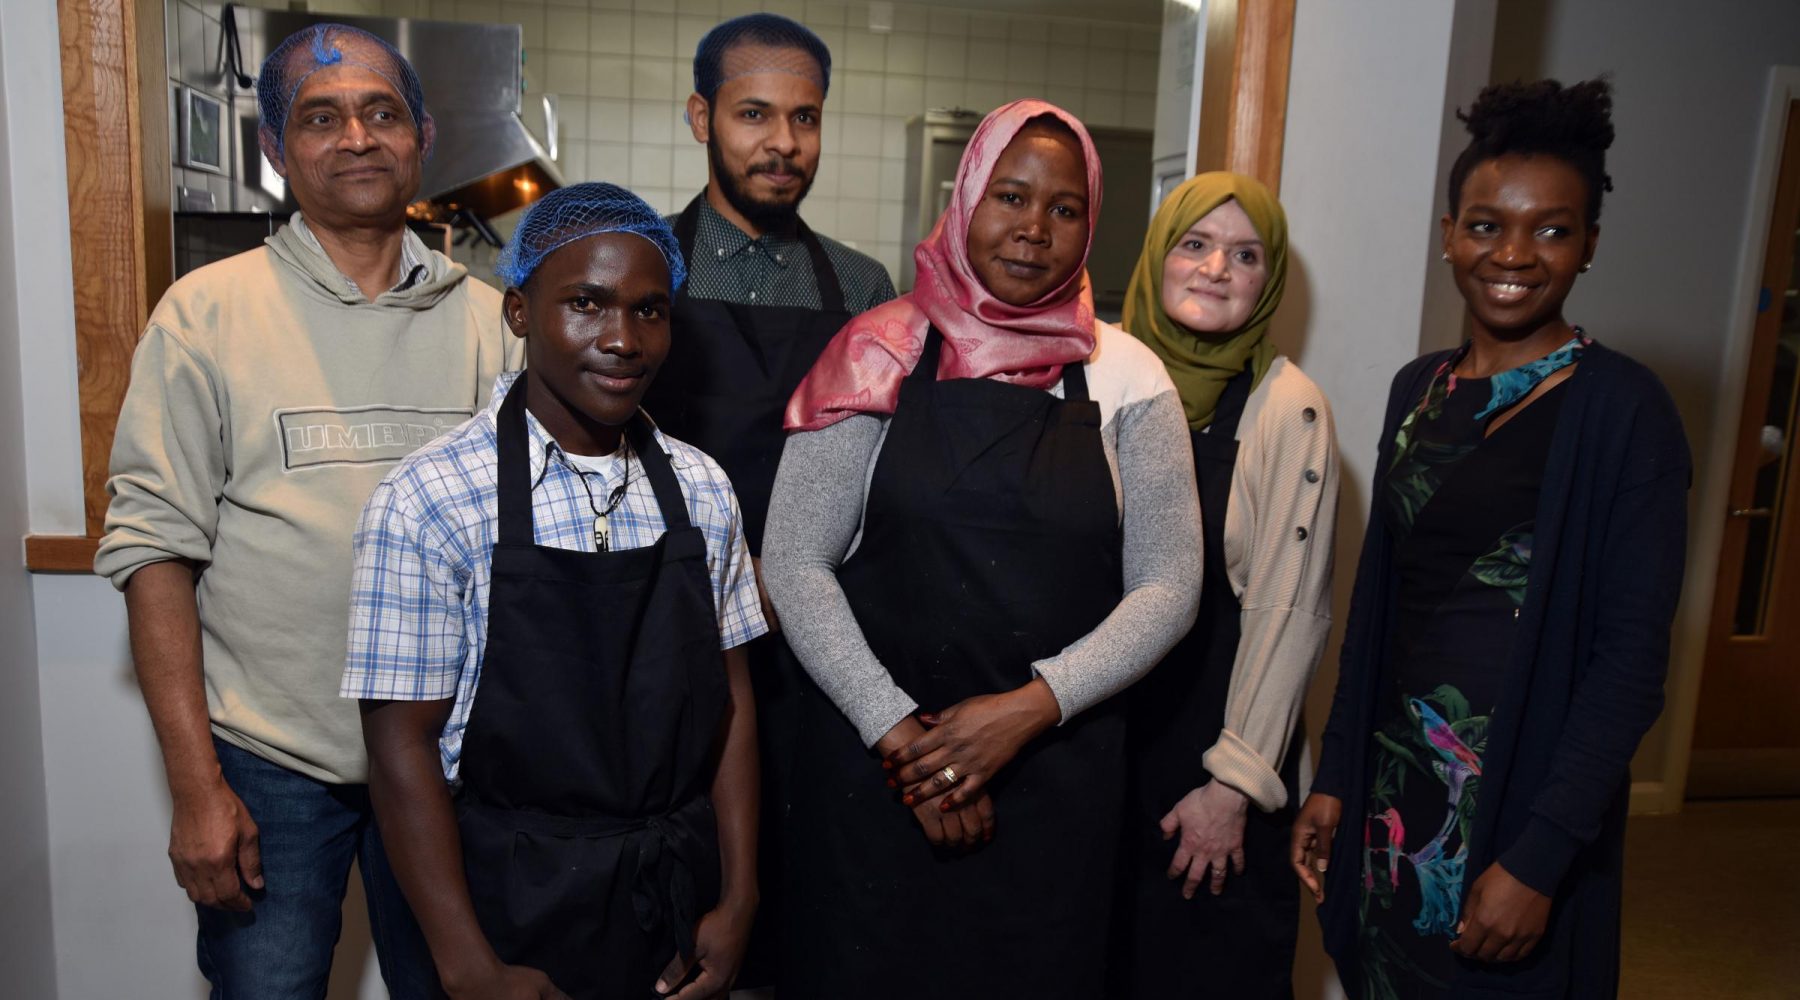 Meet the chefs behind the new Refugee Cafe…